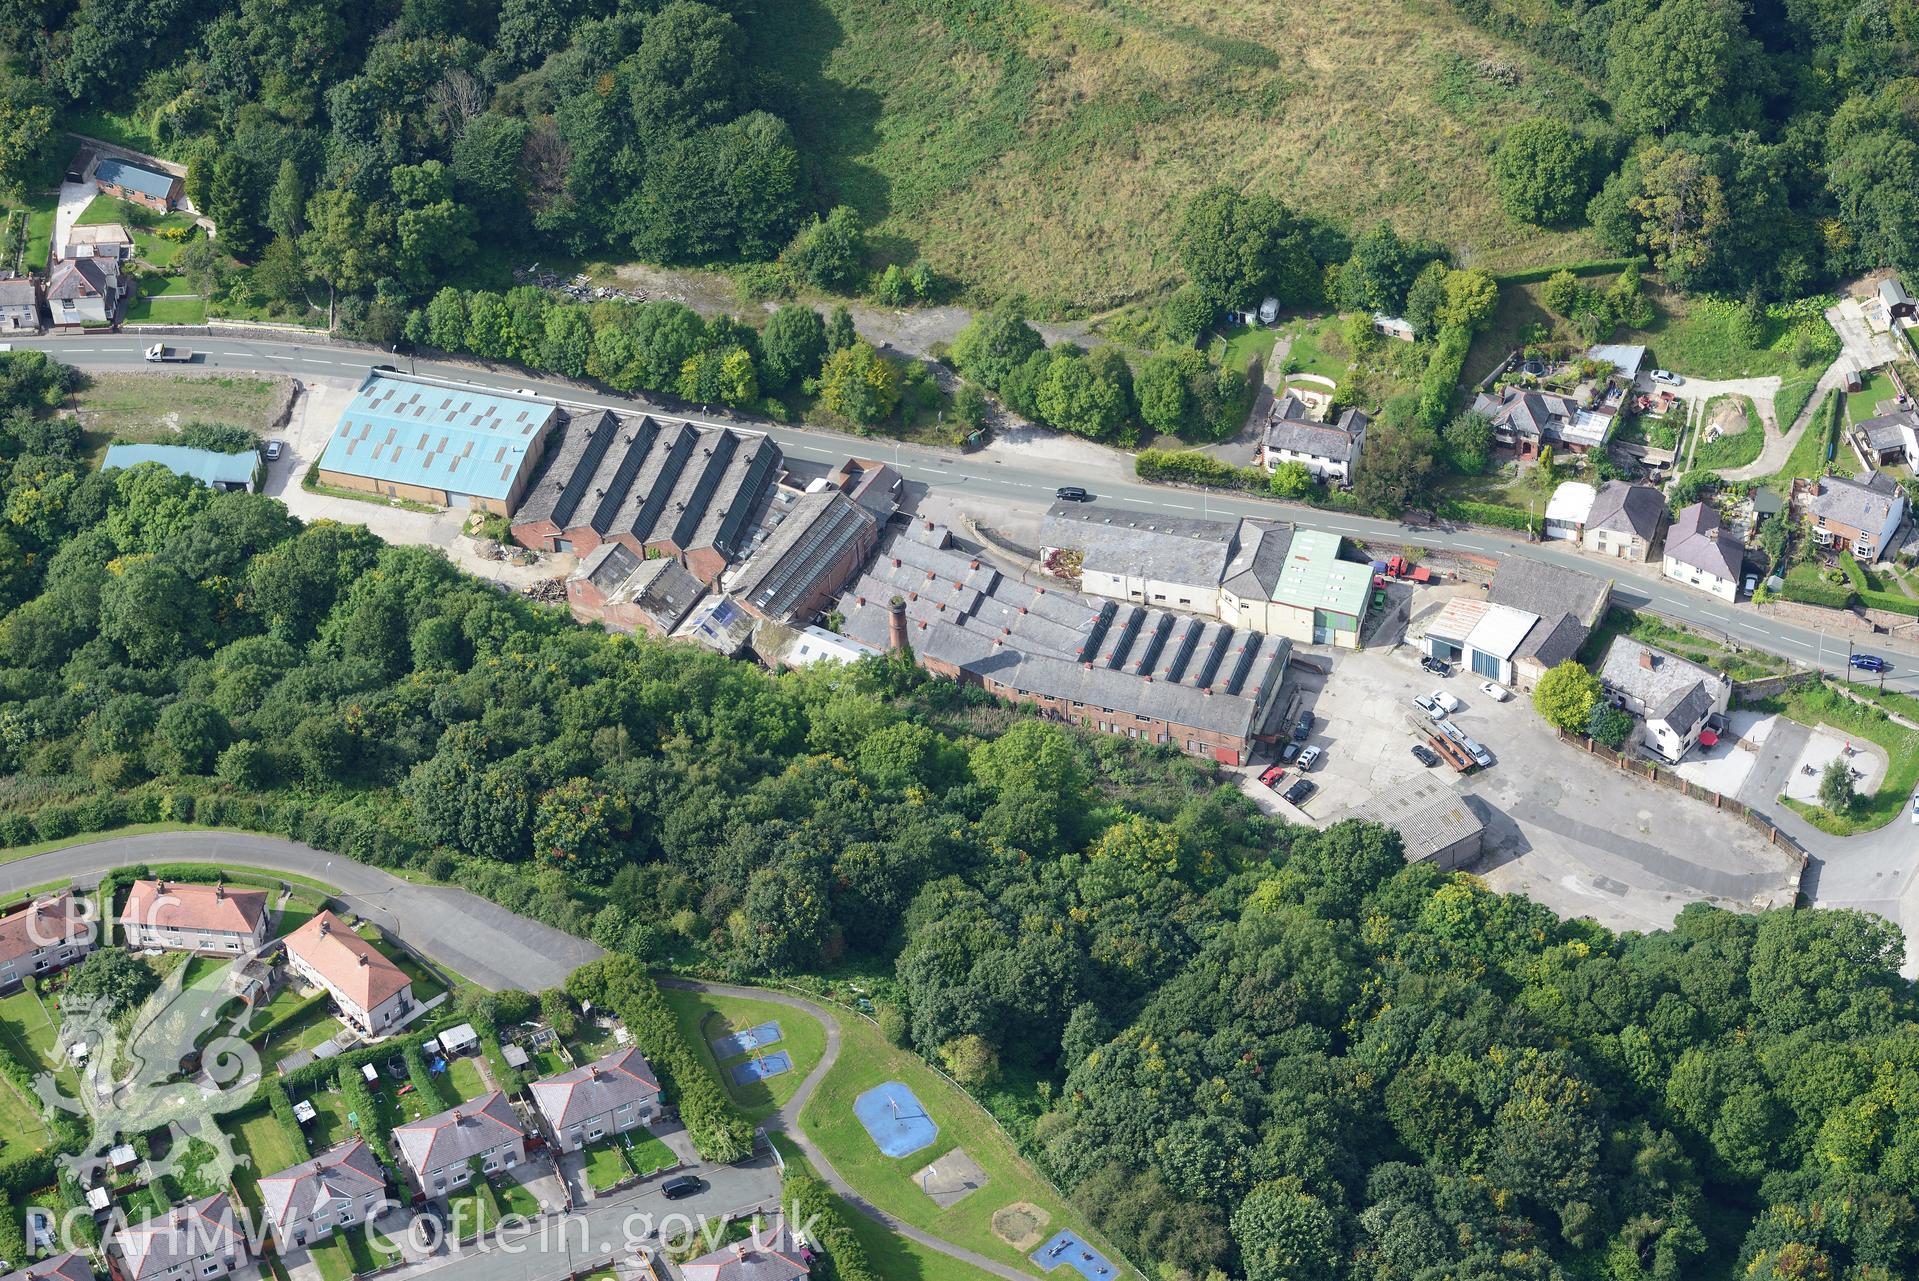 Greenfield Iron Foundry, Greenfield Valley Heritage Park, Holywell. Oblique aerial photograph taken during the Royal Commission's programme of archaeological aerial reconnaissance by Toby Driver on 11th September 2015.